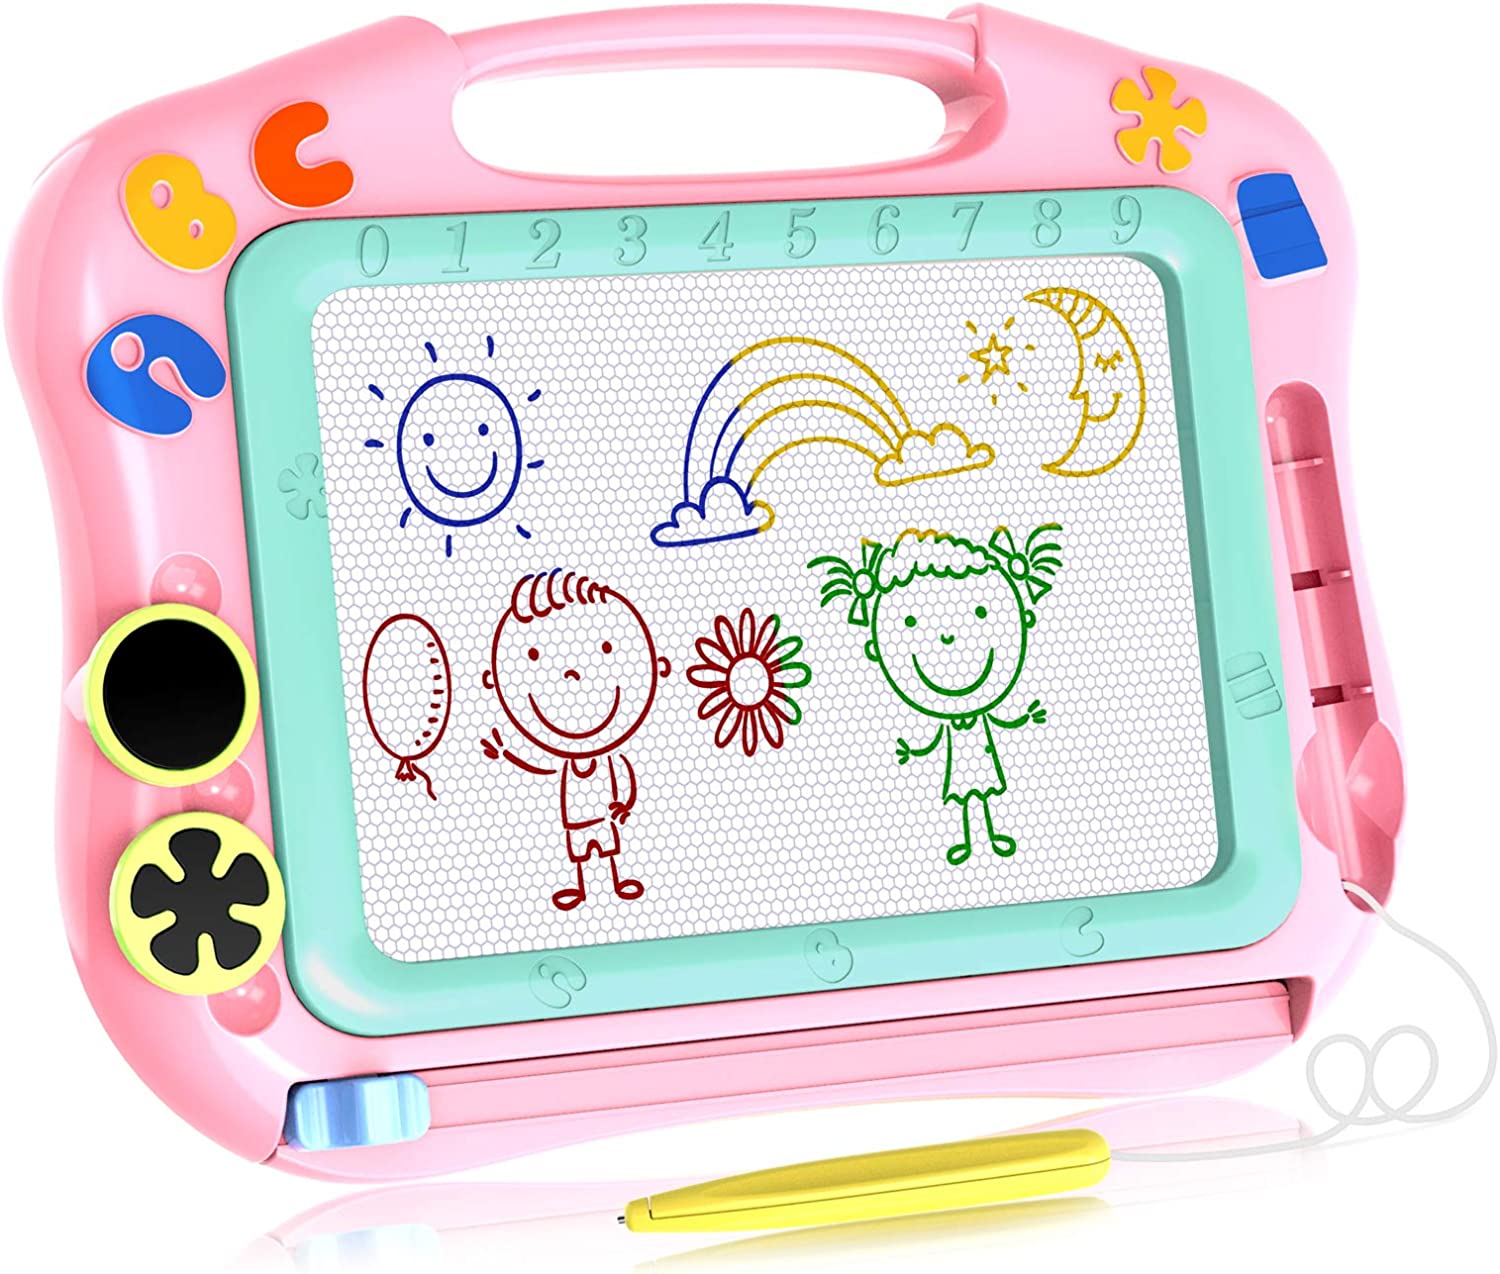 HCFJEH Magnetic Drawing Board for Toddlers 1-3, Color Erasable Doodle Writing Pad, Learning Painting Sketch Pad, Best Birthday Easter Christmas